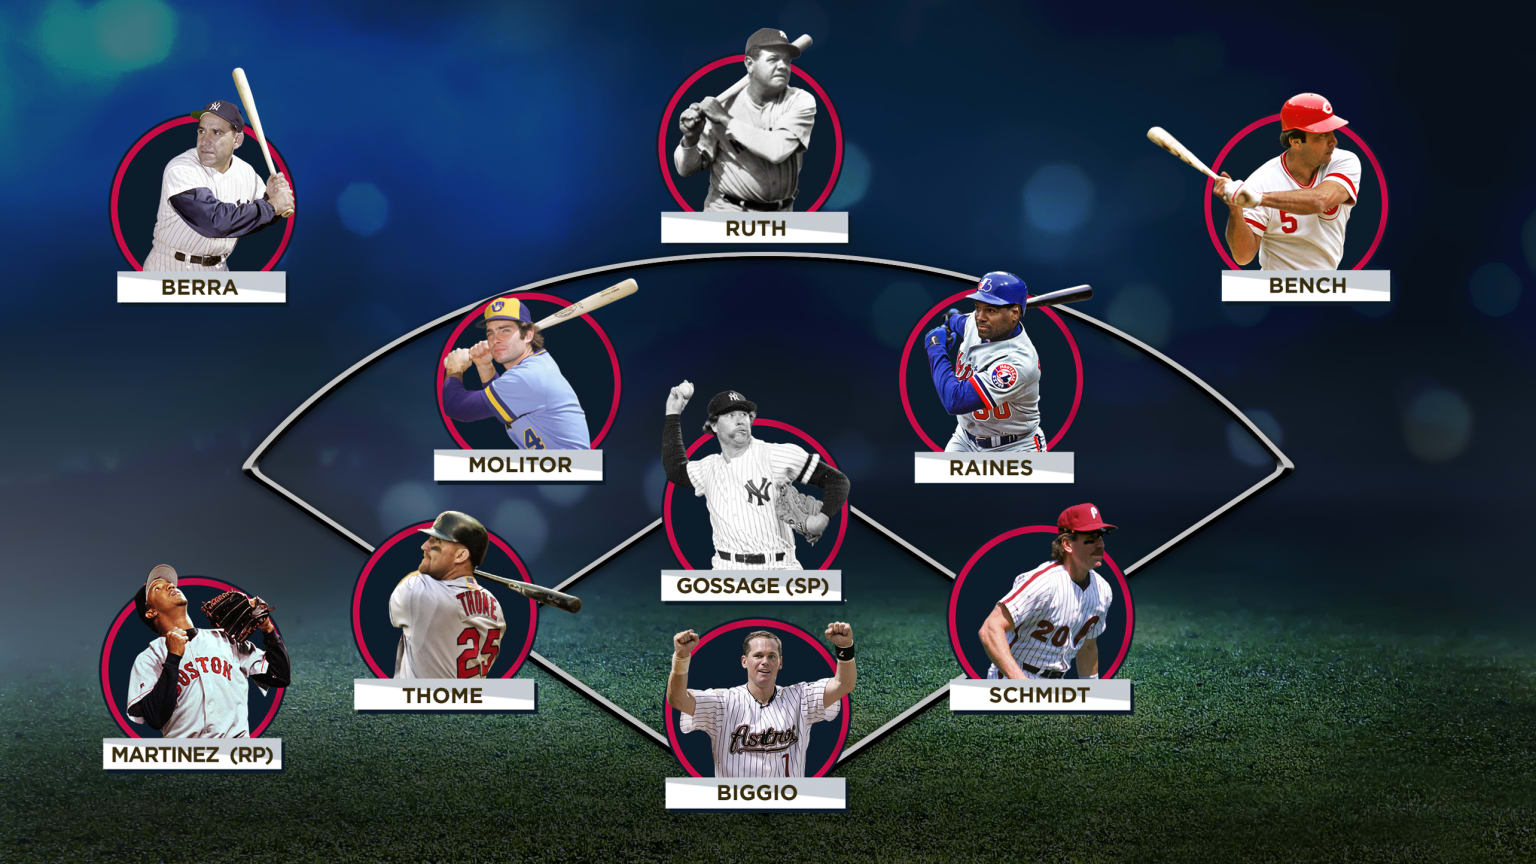 A designed image spotlighting legendary players at unusual positions on the field